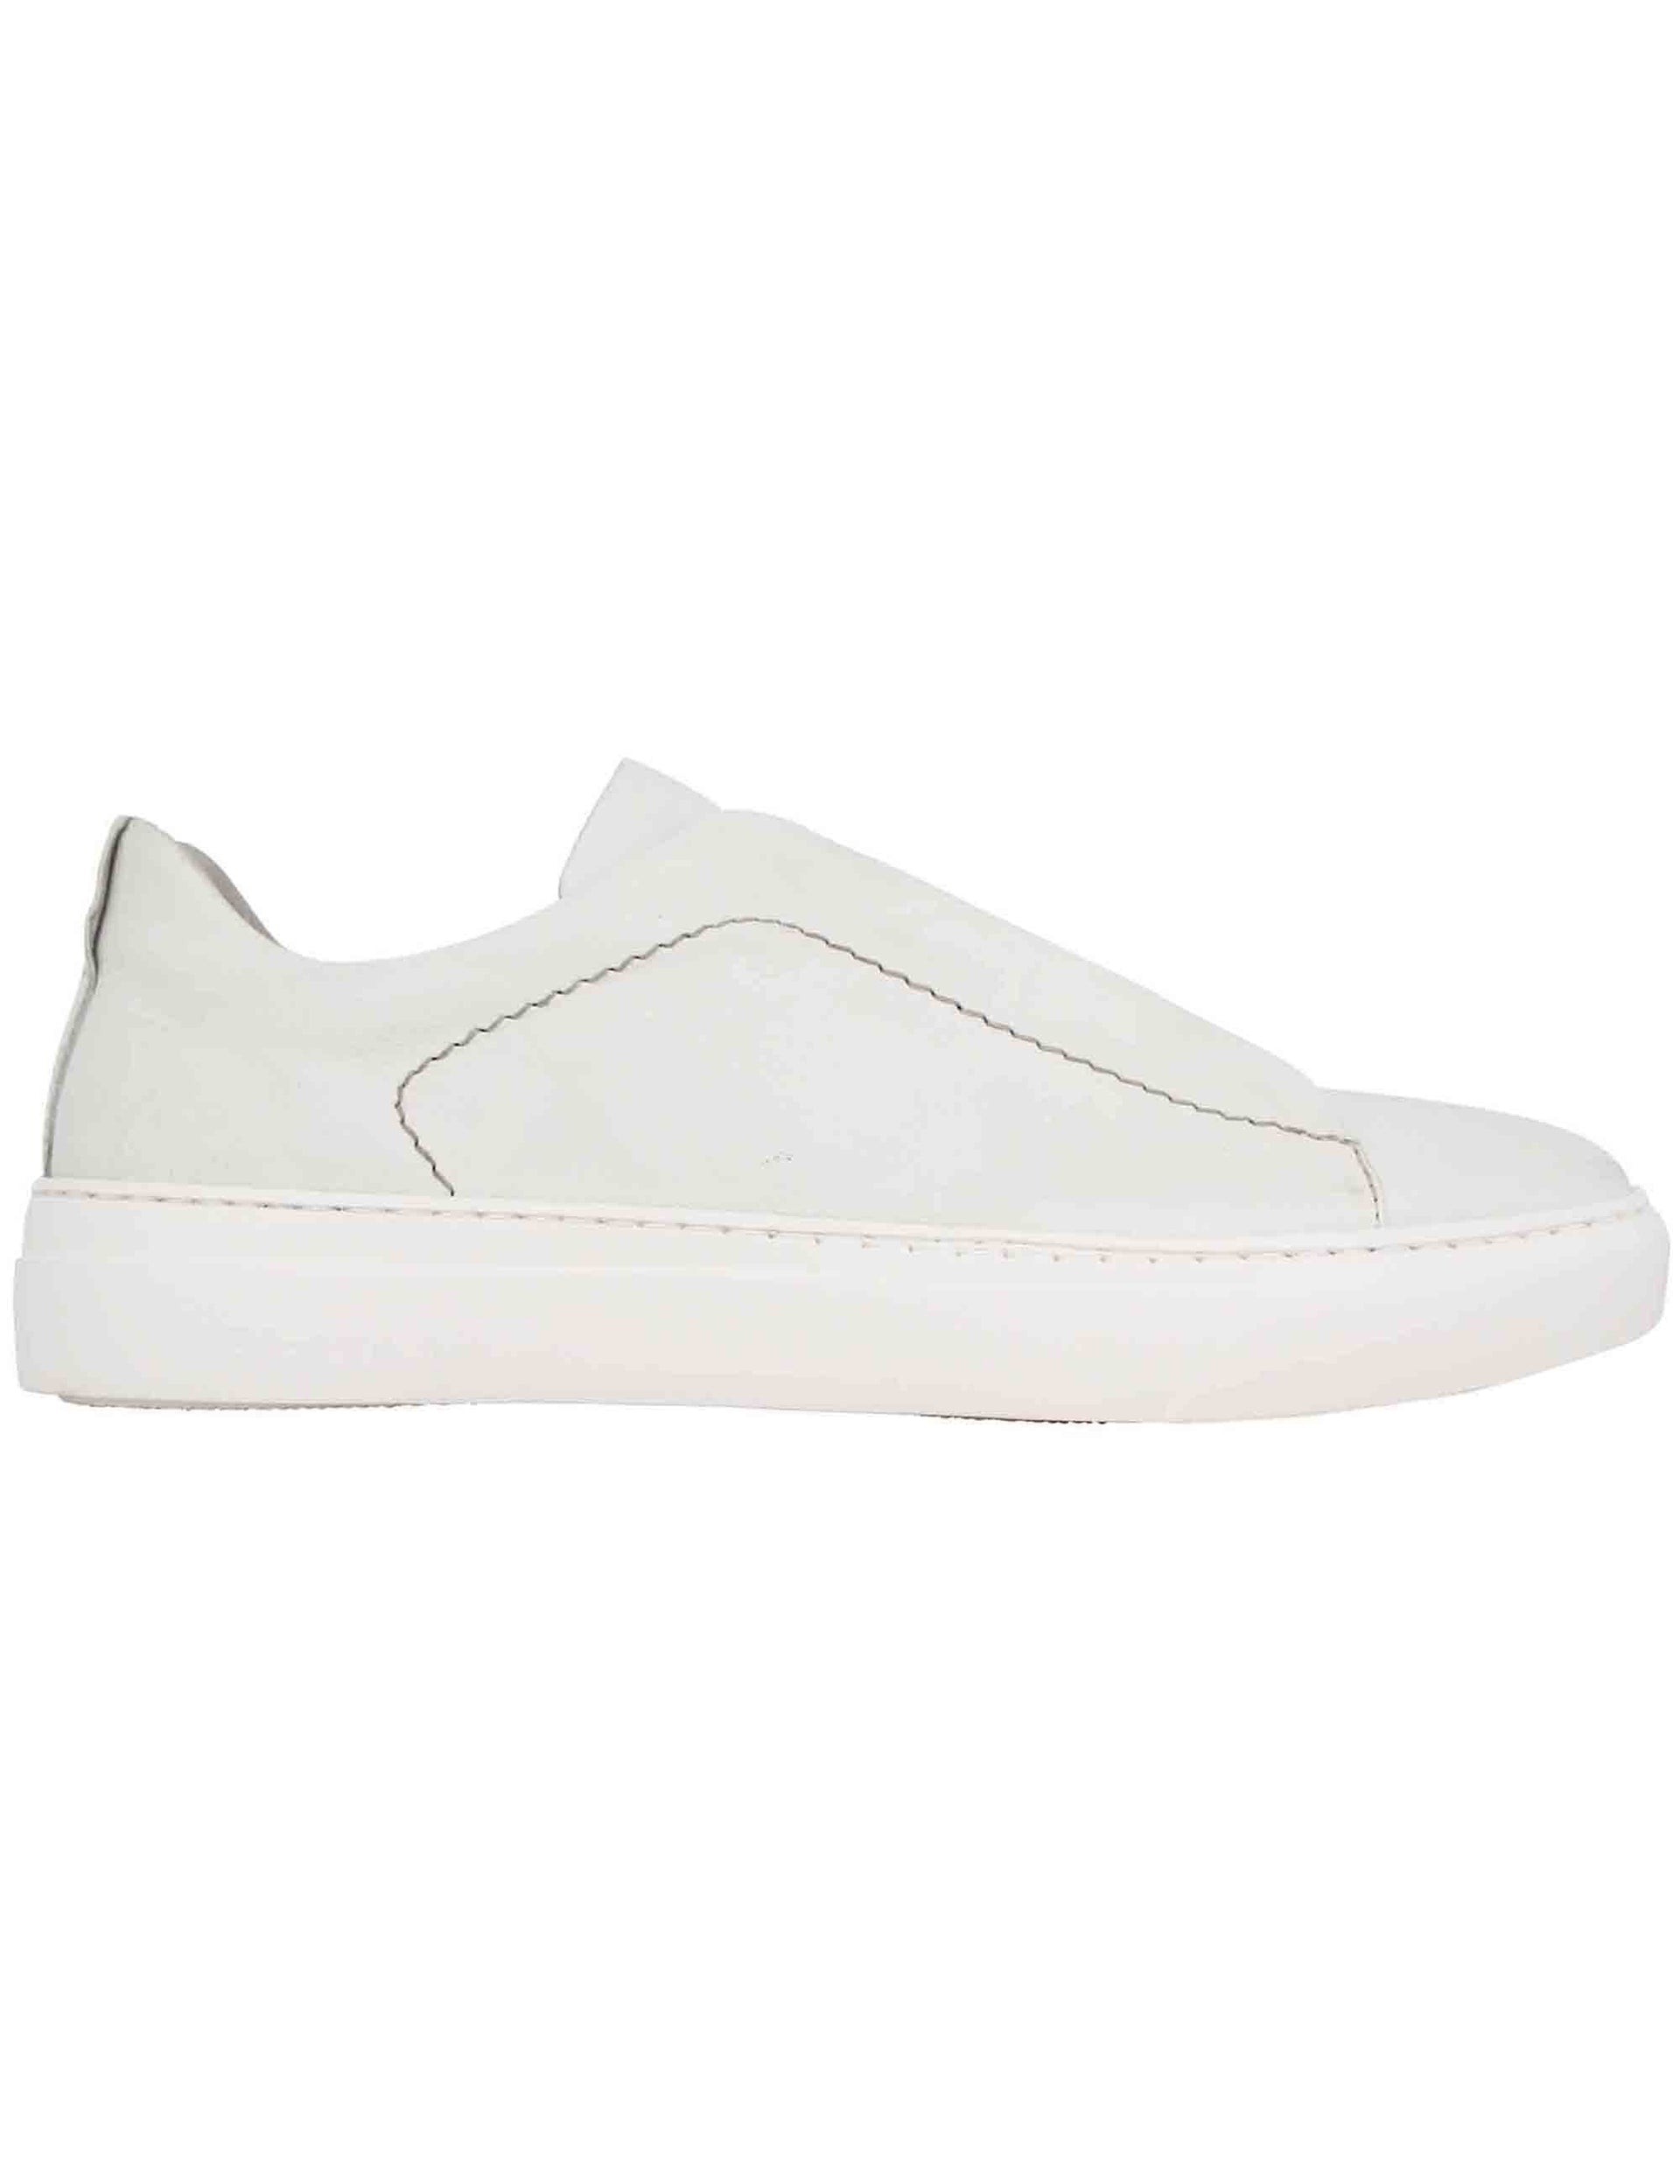 Men's white leather sneakers with elastic